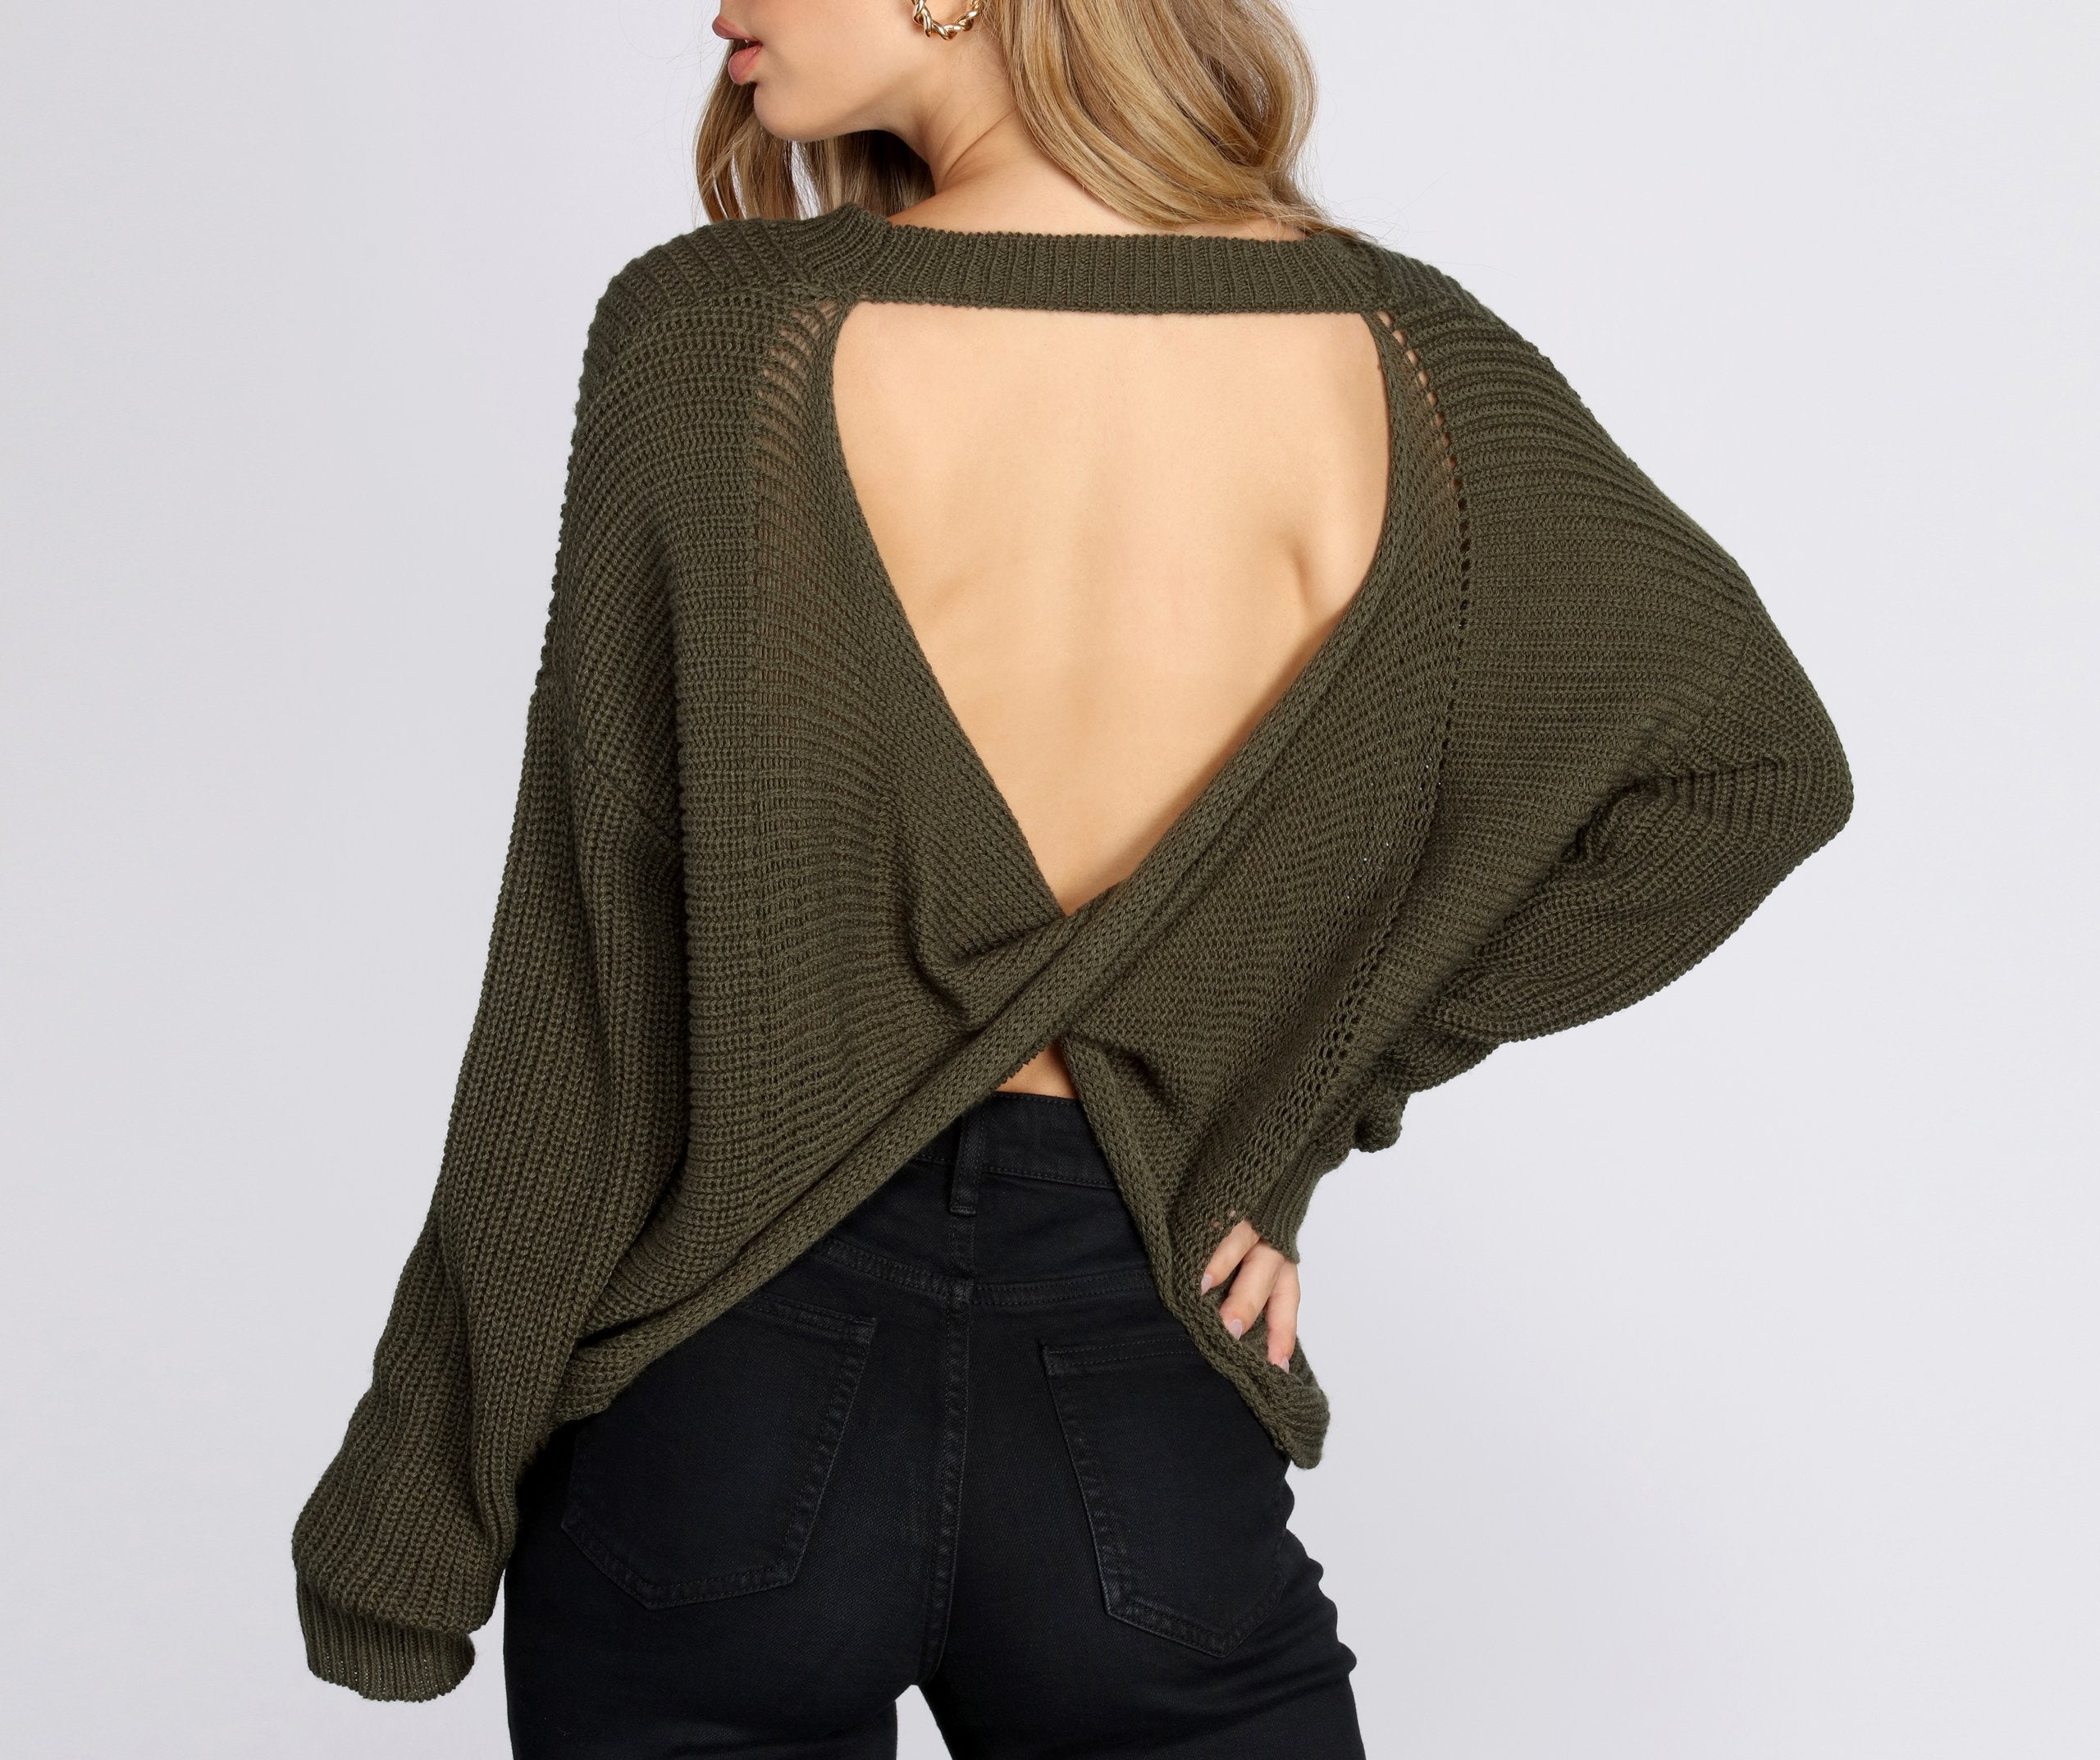 Knot Thinking About You Sweater - Lady Occasions